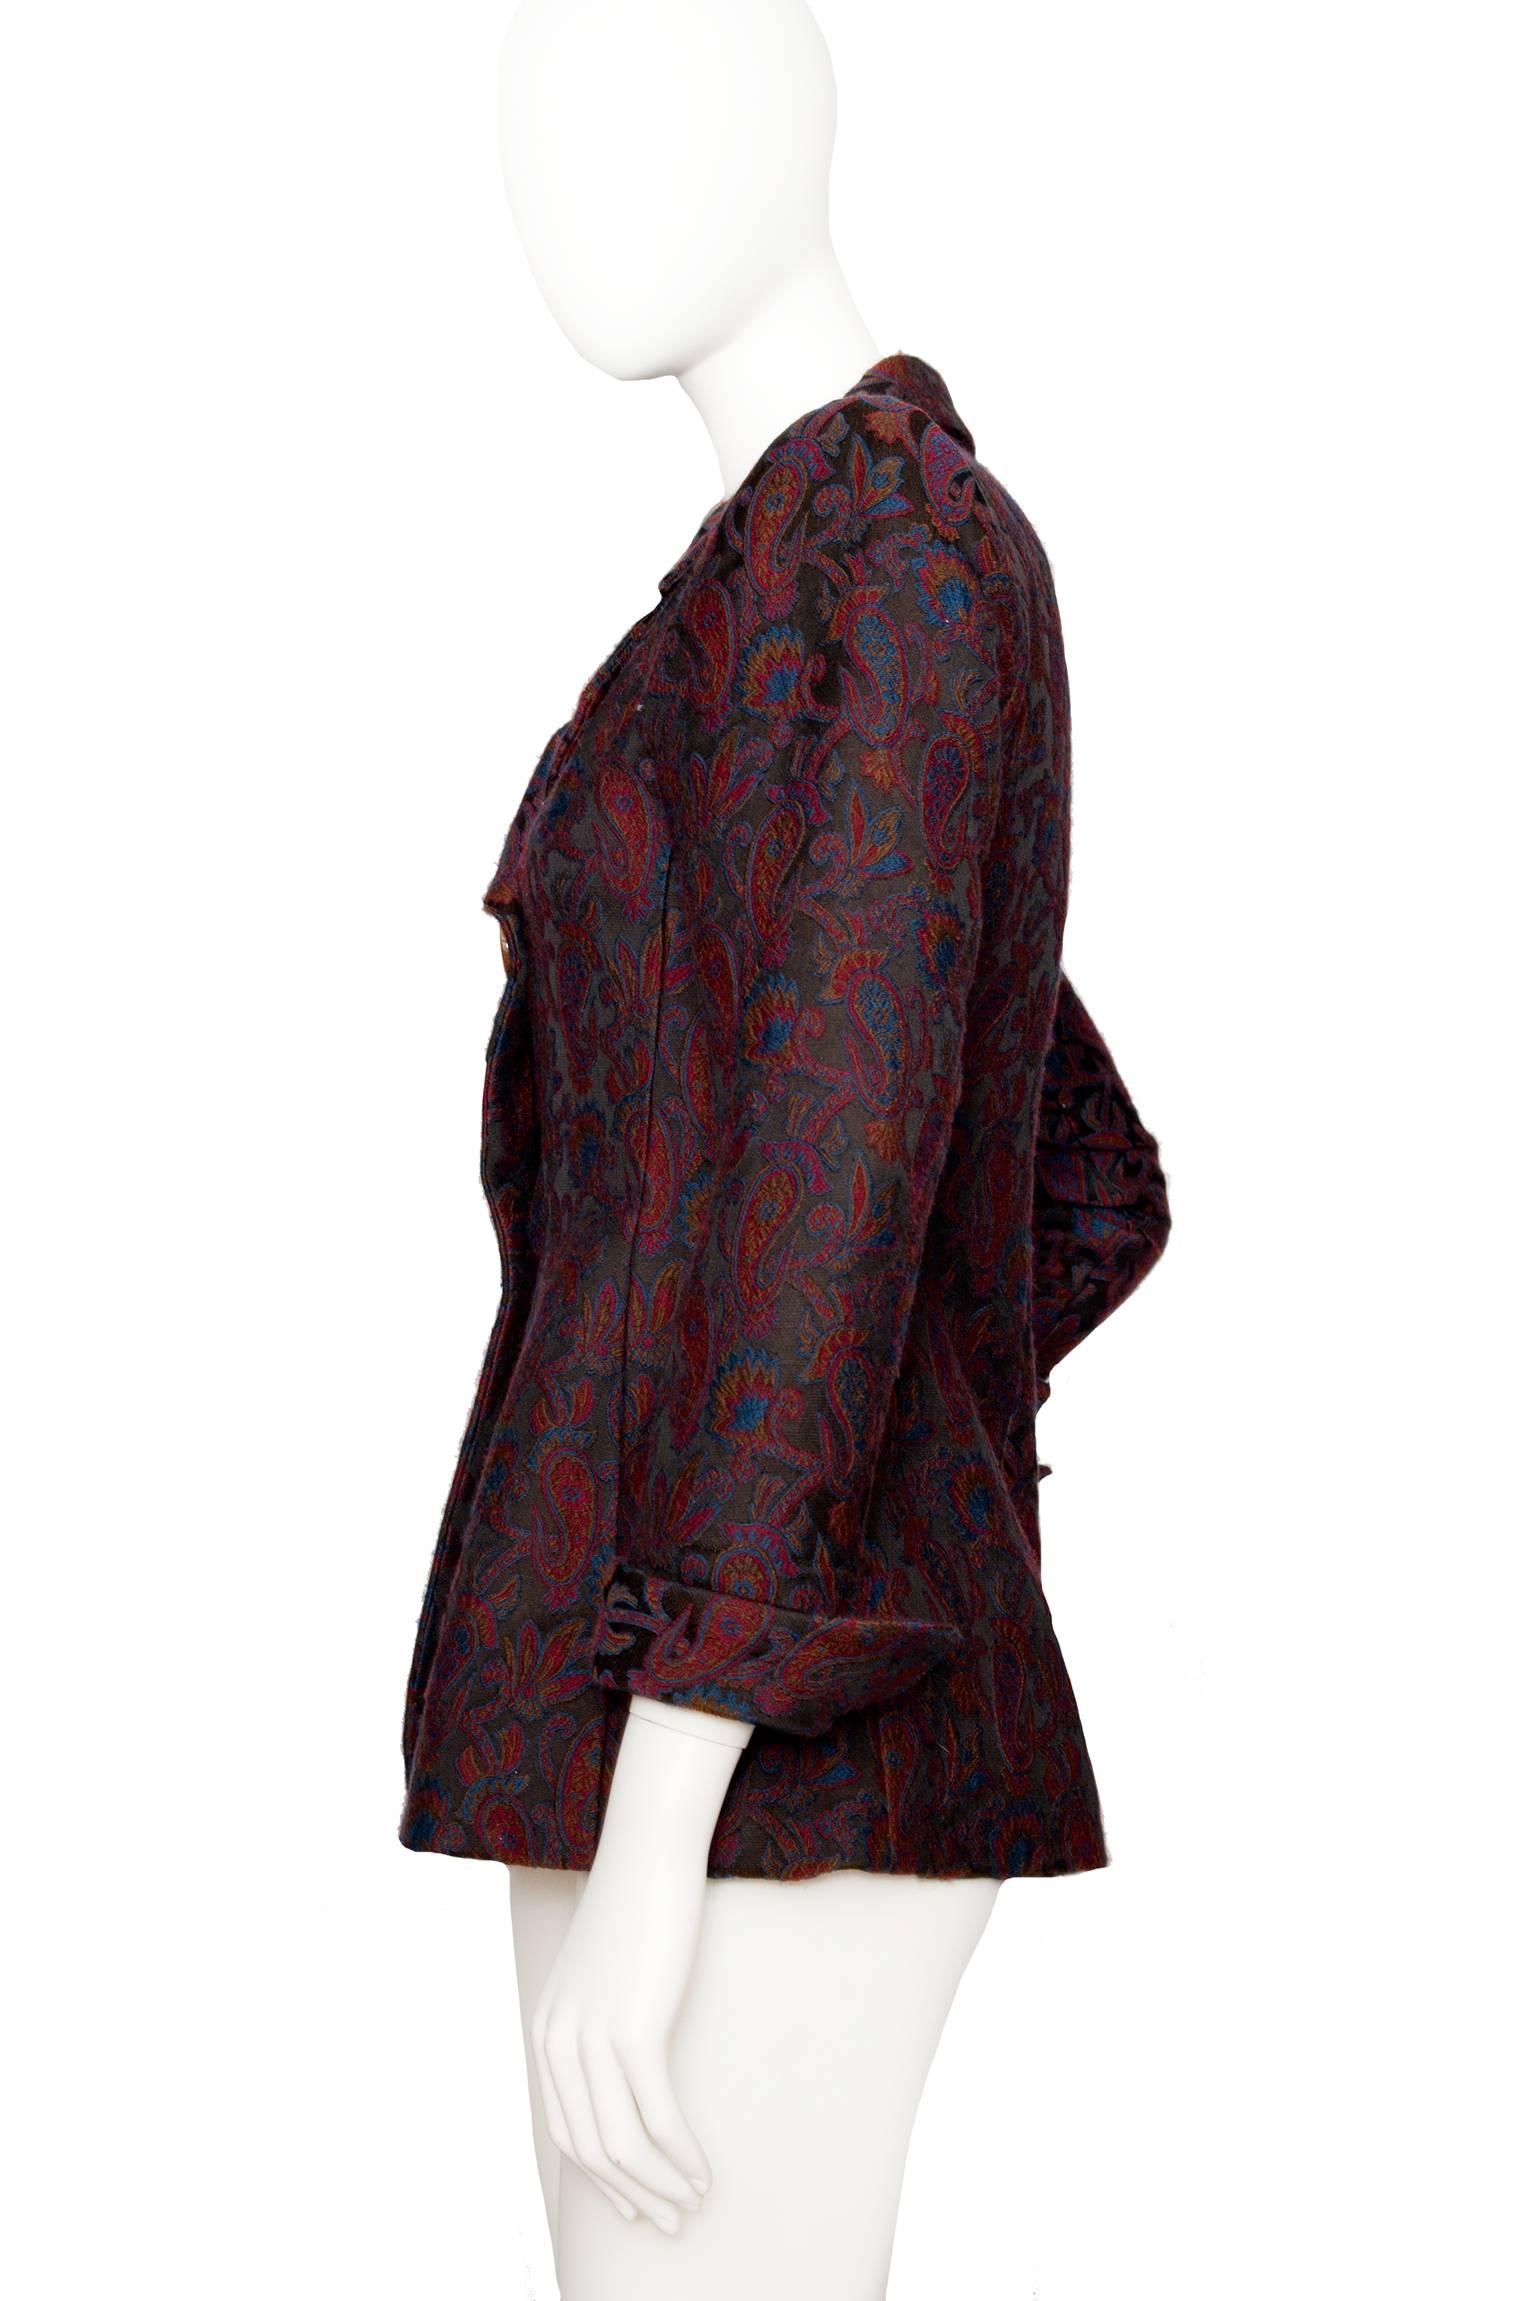 A 1980s Yves Saint Laurent Rive Gauche tapestry blazer with an asymmetrical front buttoned closure and long tapered sleeves with turn up cuff. The color of the tapestry pattern consists of a dark burgundy and blue colors intertwined to form a